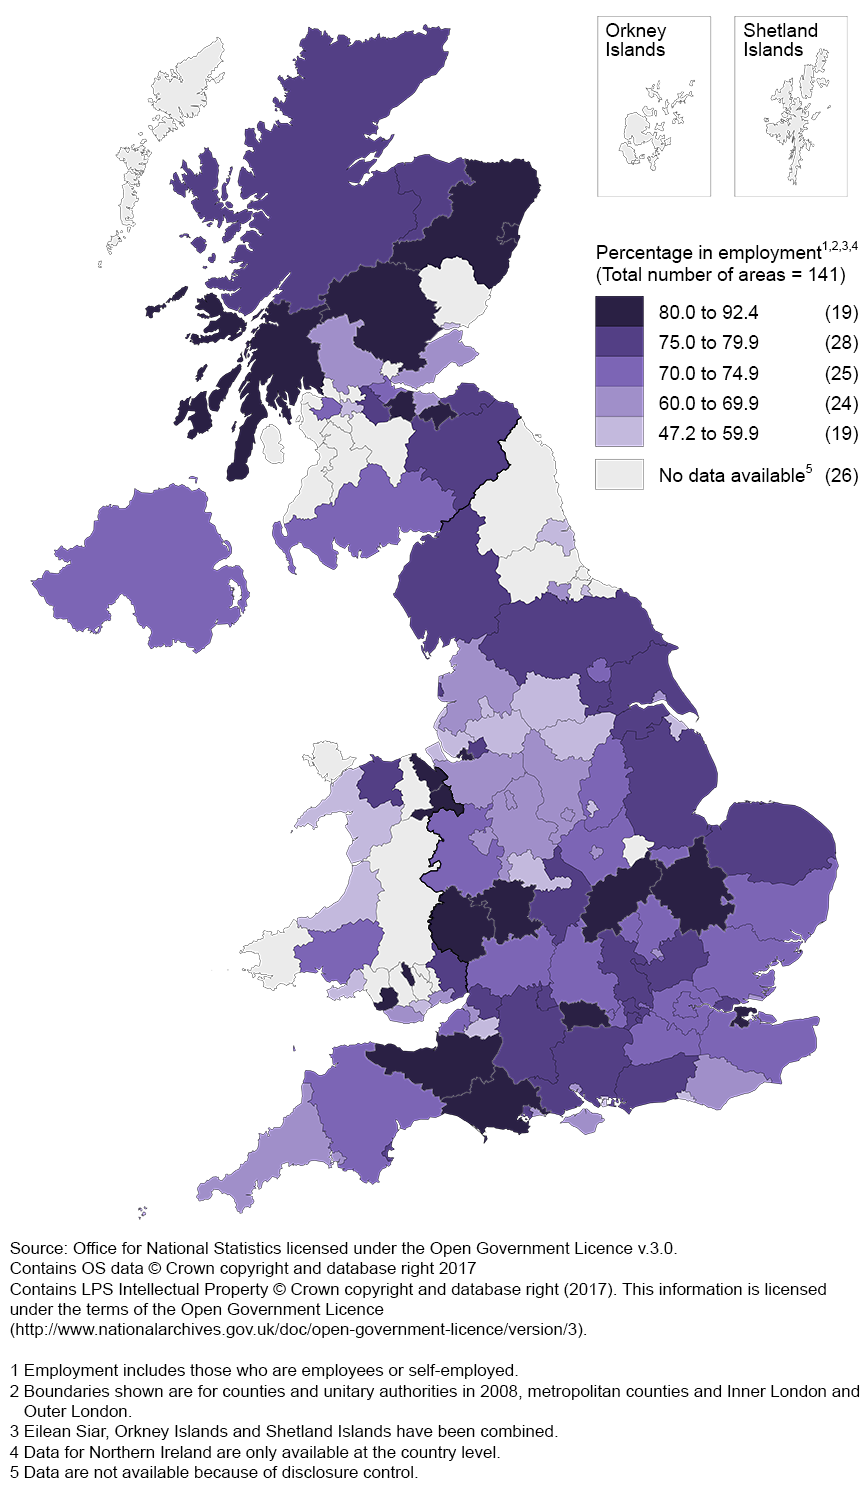 Above average percentage of population in employment is seen in south England and north Scotland.